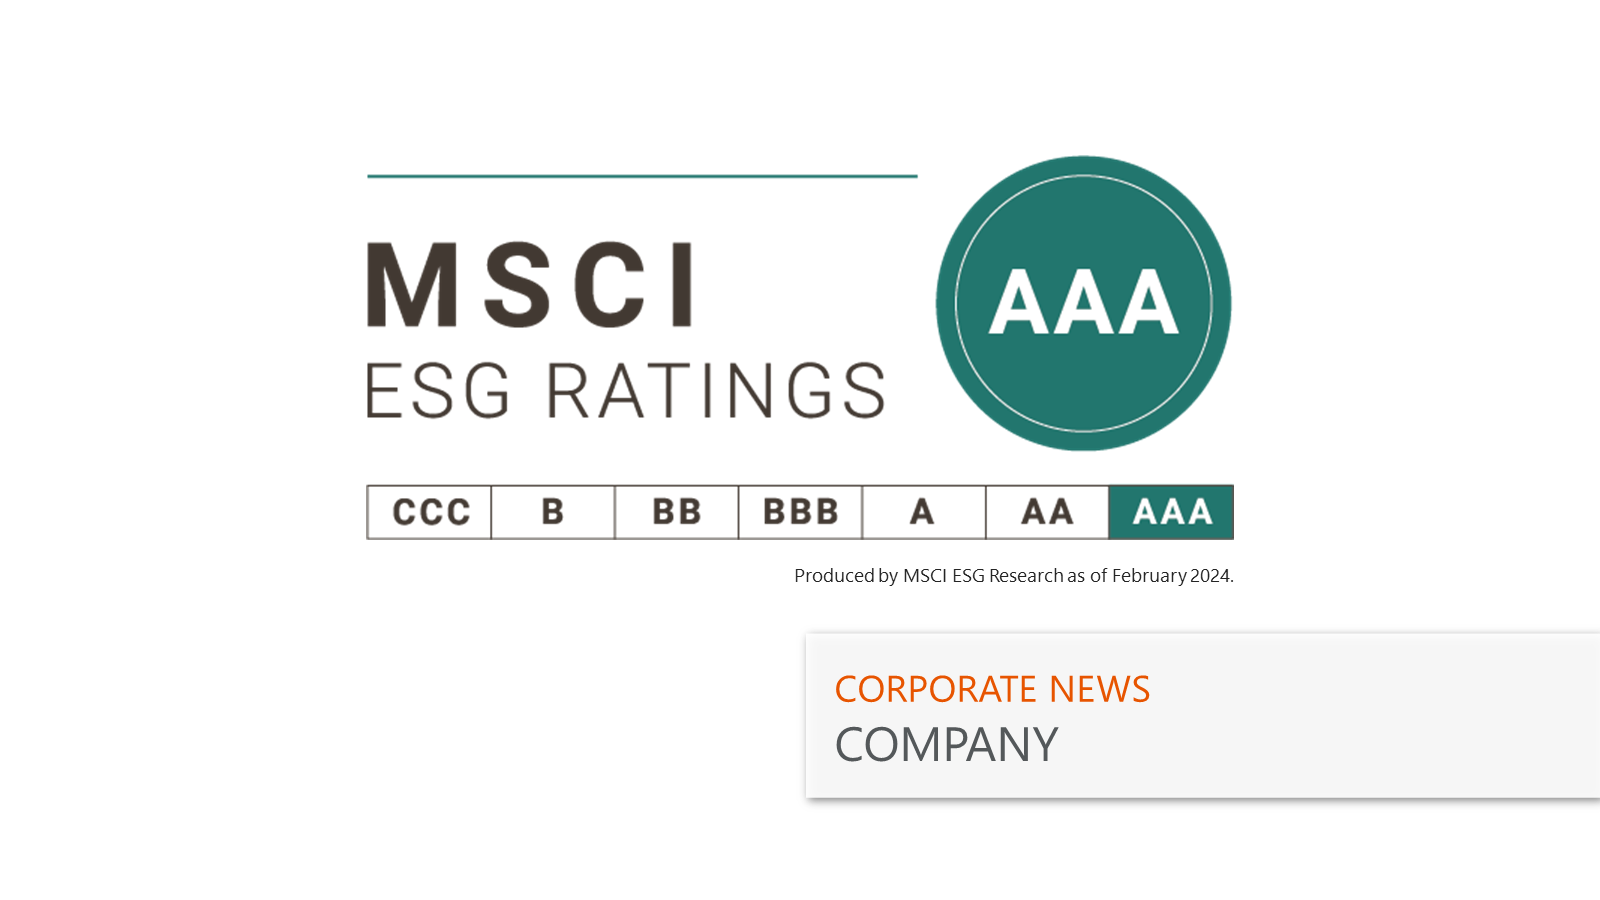 LIXIL received the highest MSCI ESG rating of AAA for the second year サムネイル画像